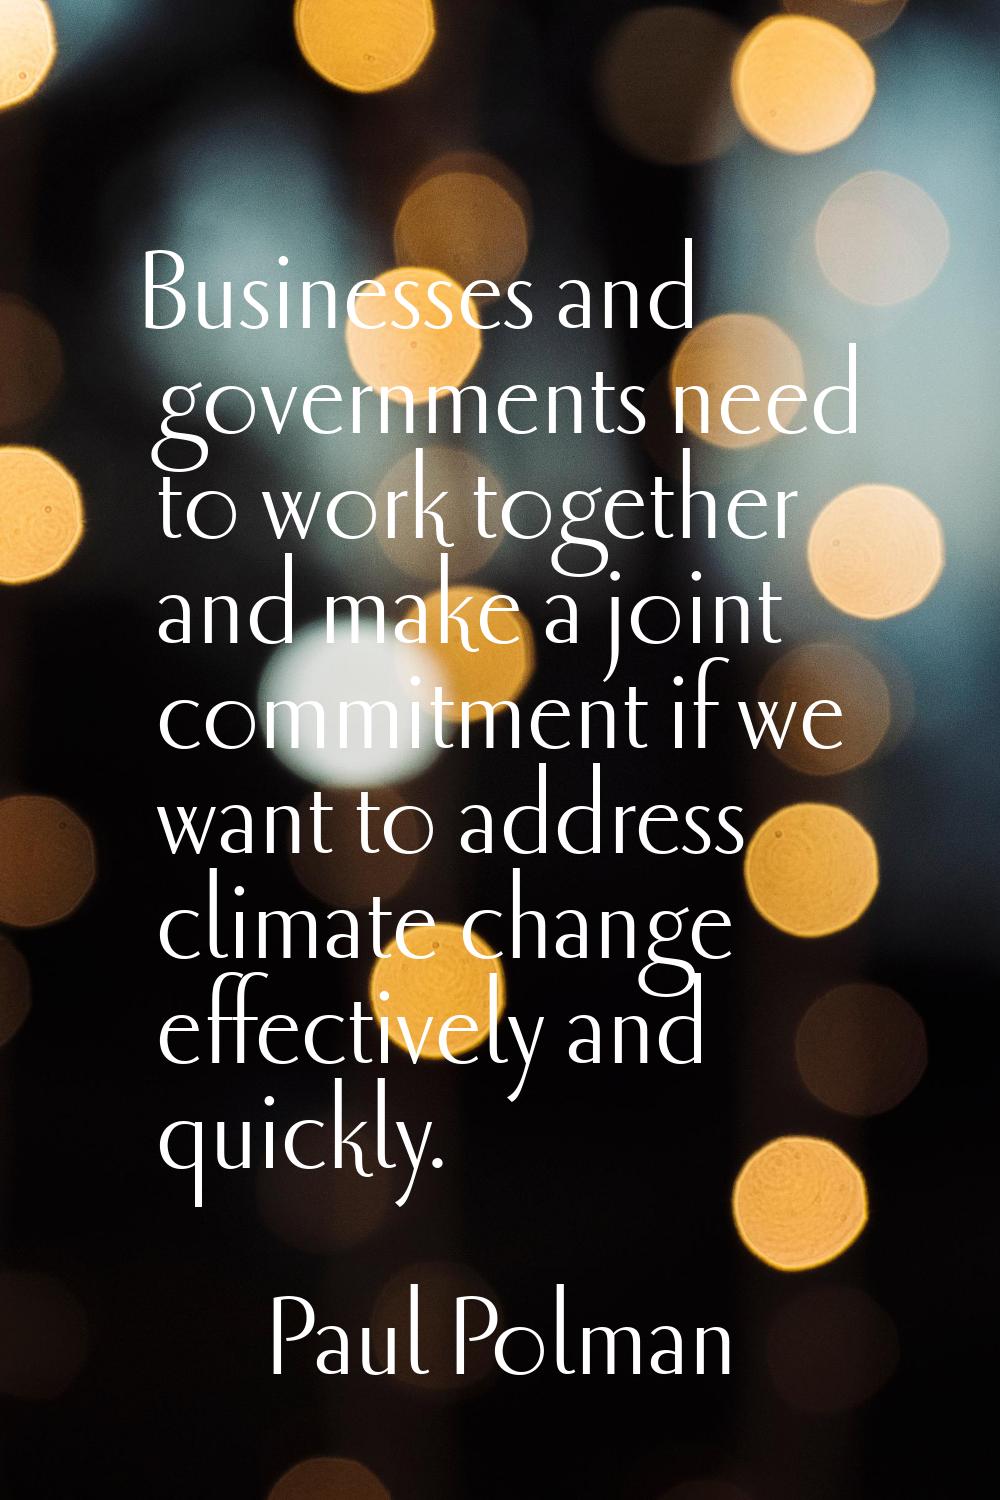 Businesses and governments need to work together and make a joint commitment if we want to address 